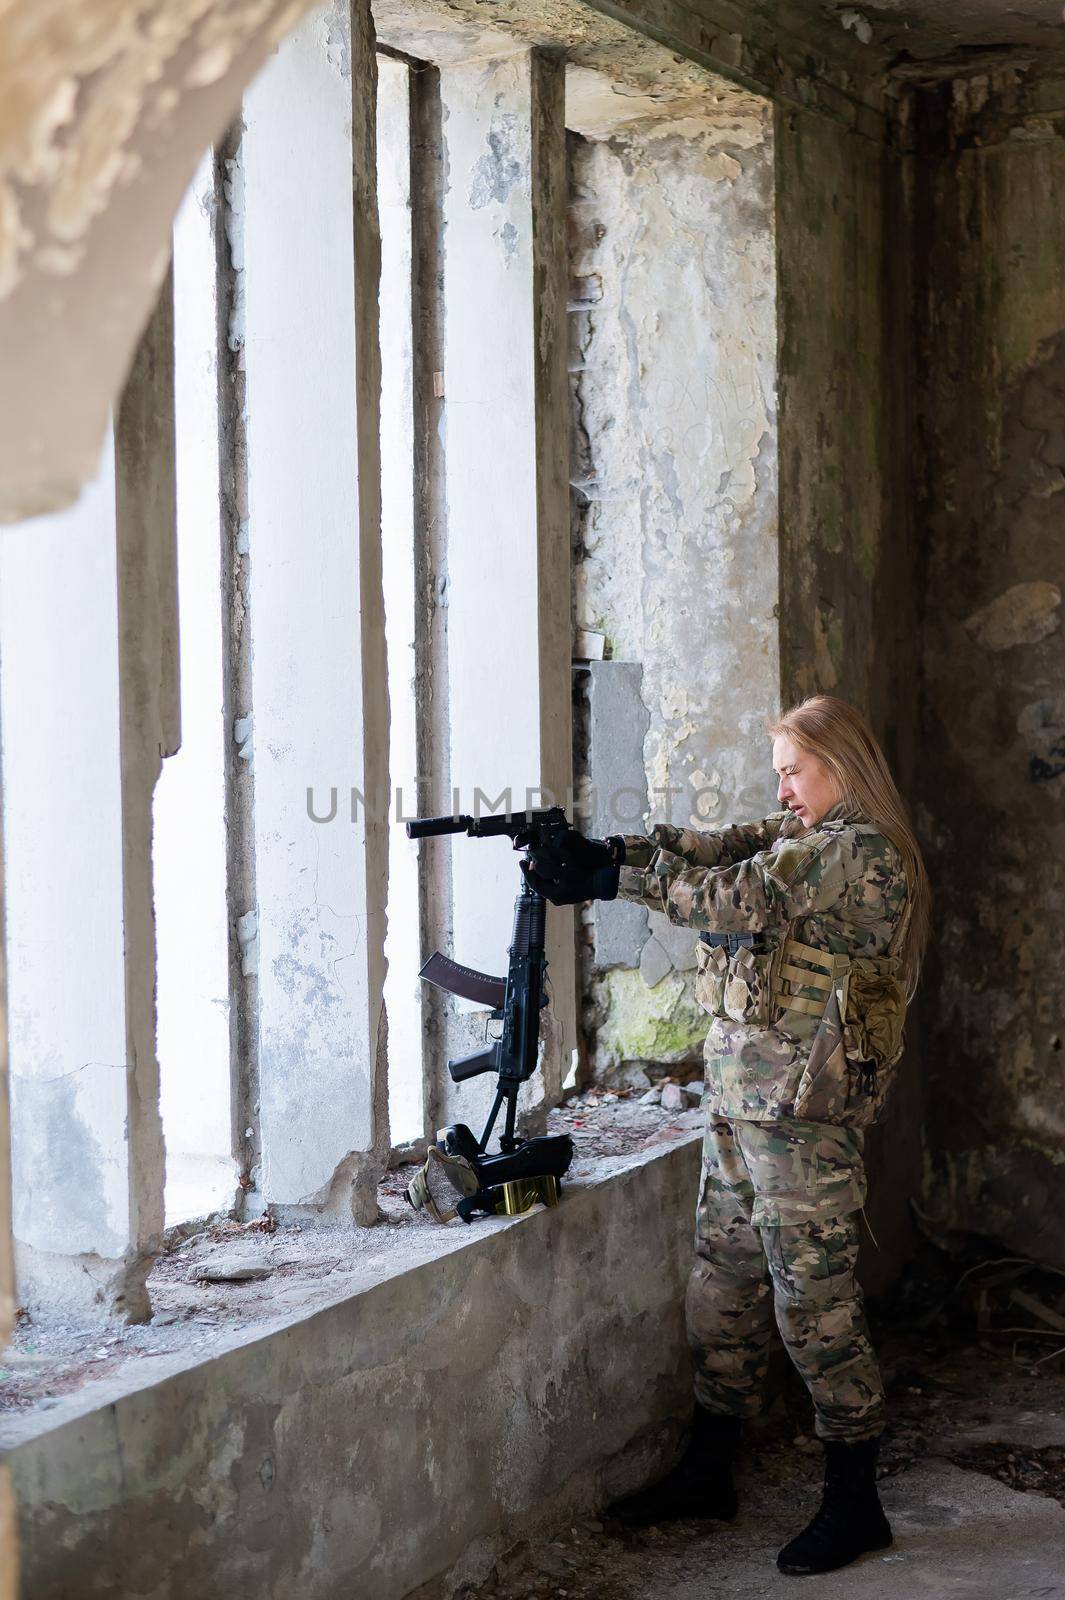 A woman in an army uniform aims to shoot a firearm in an abandoned building